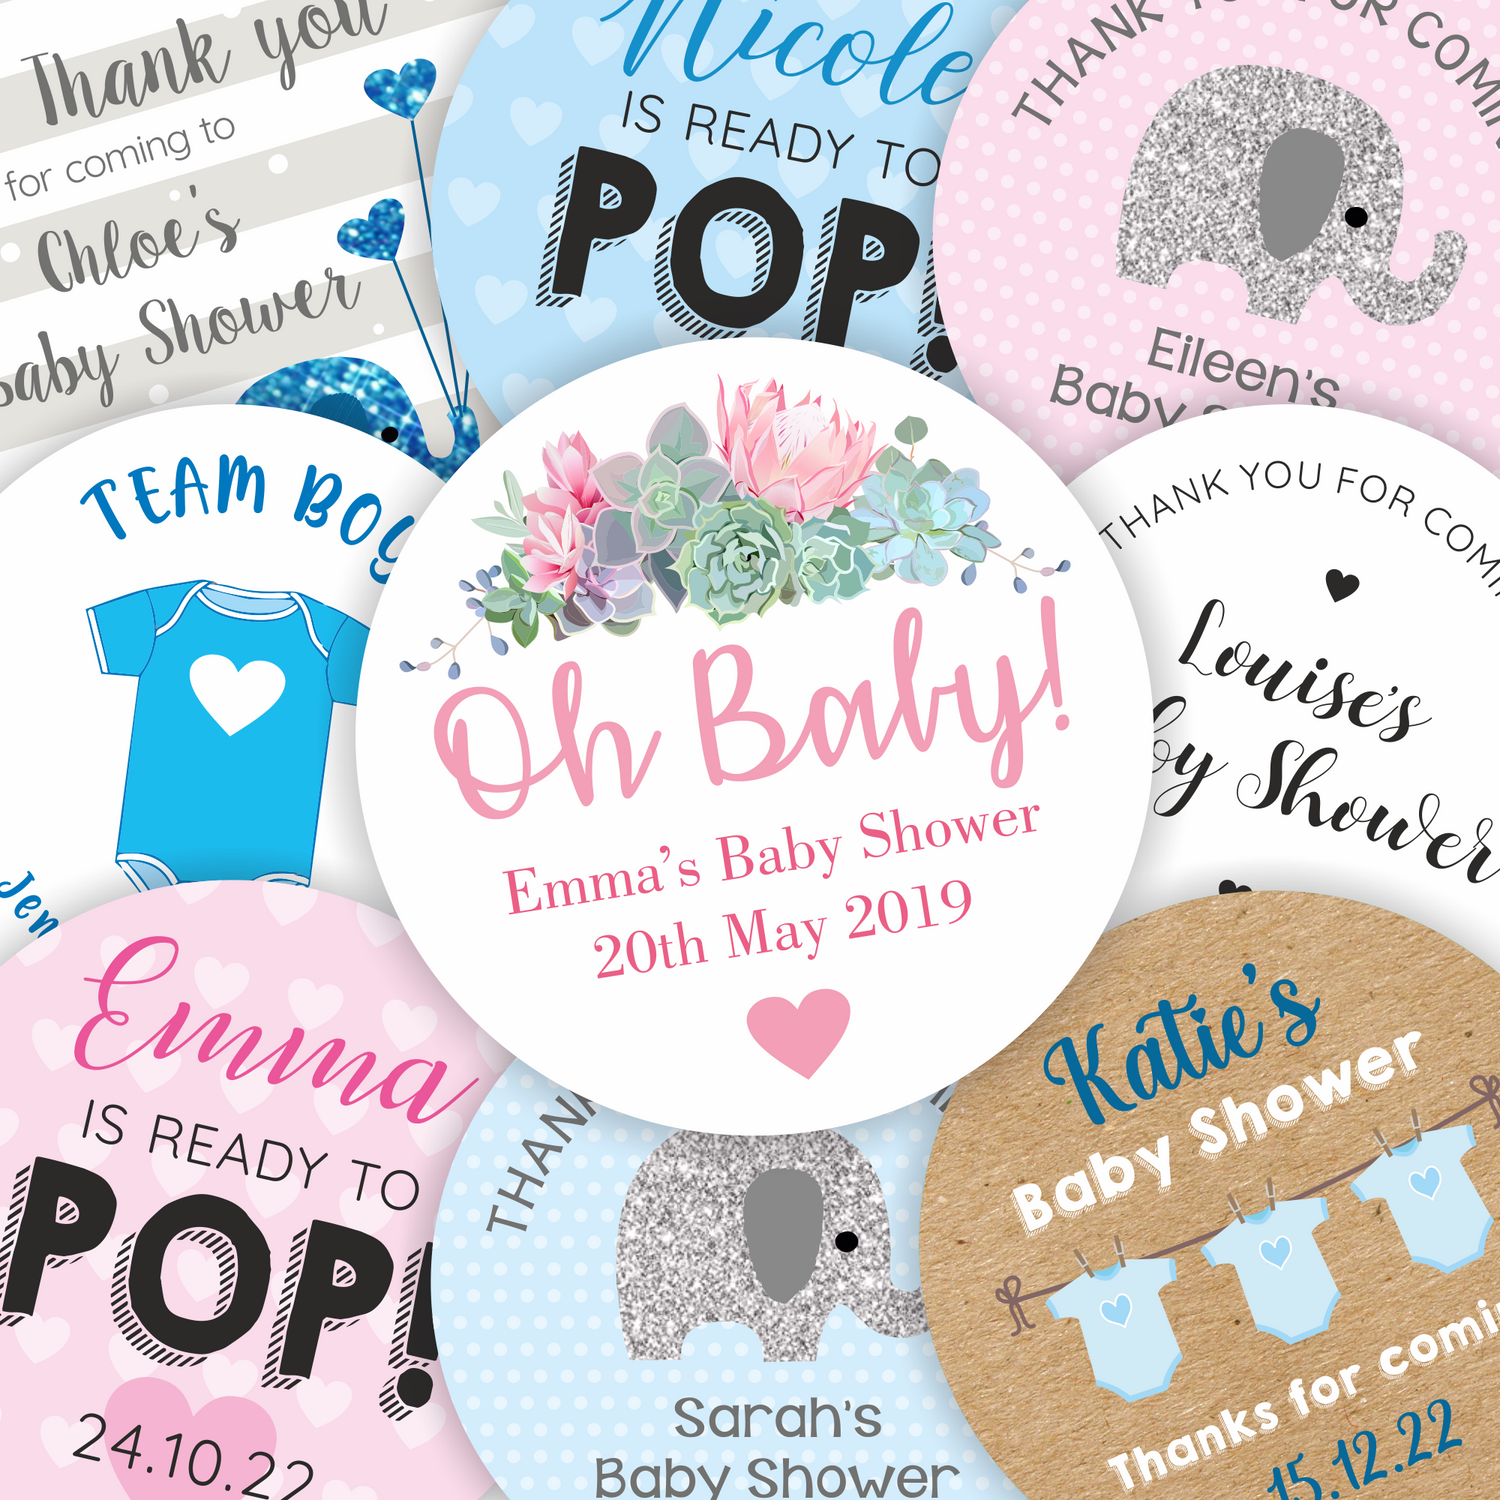 Baby Shower Stickers / Gender Reveal Stickers / Baby shower gifts / Thank you stickers / Ready to Pop / Oh baby